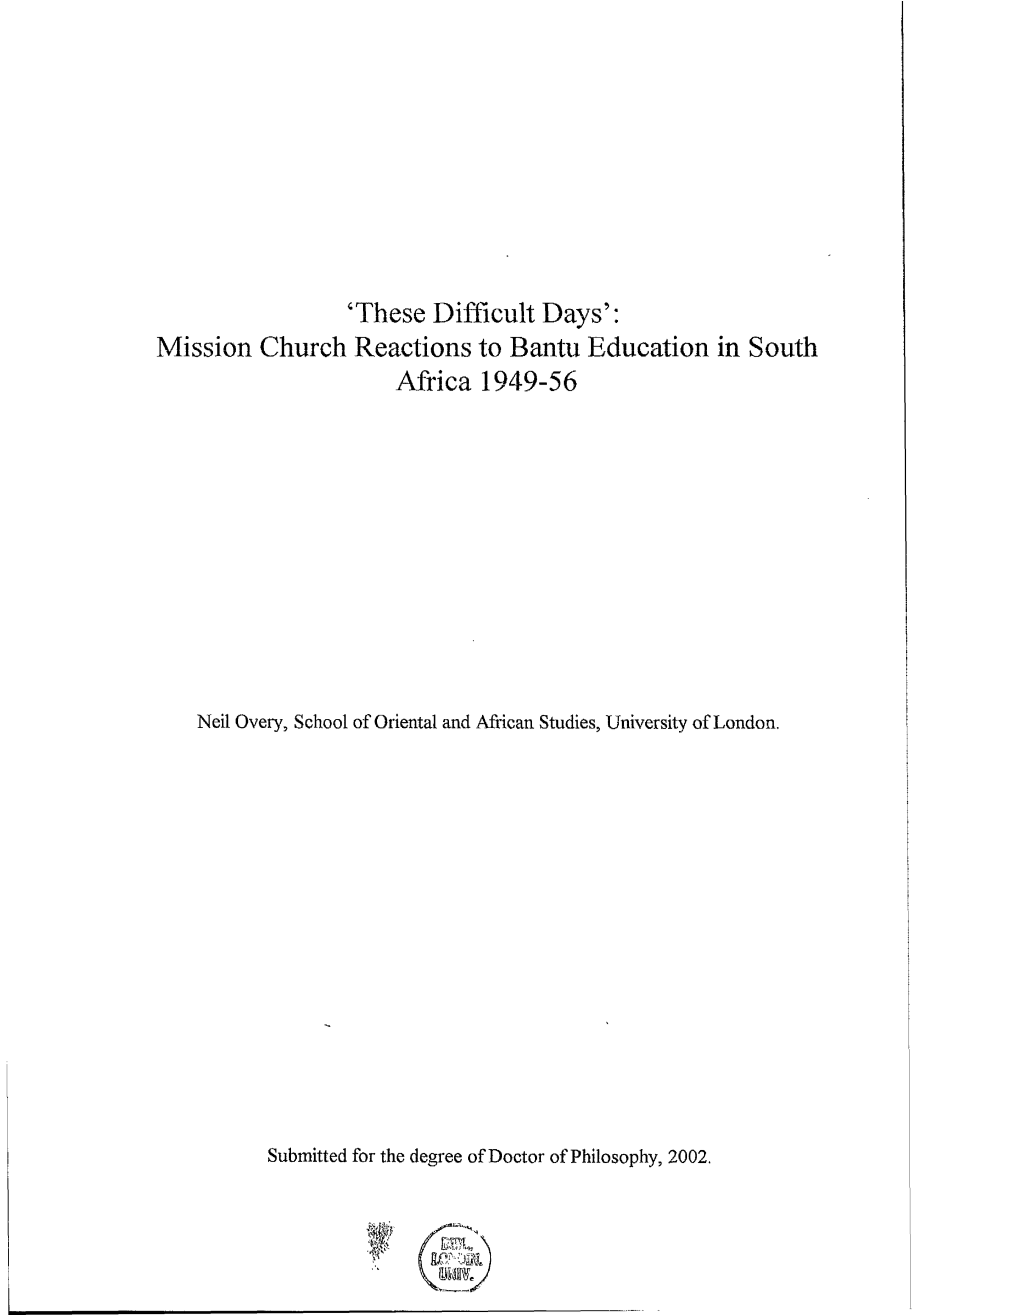 'These Difficult Days': Mission Church Reactions to Bantu Education in South Africa 1949-56